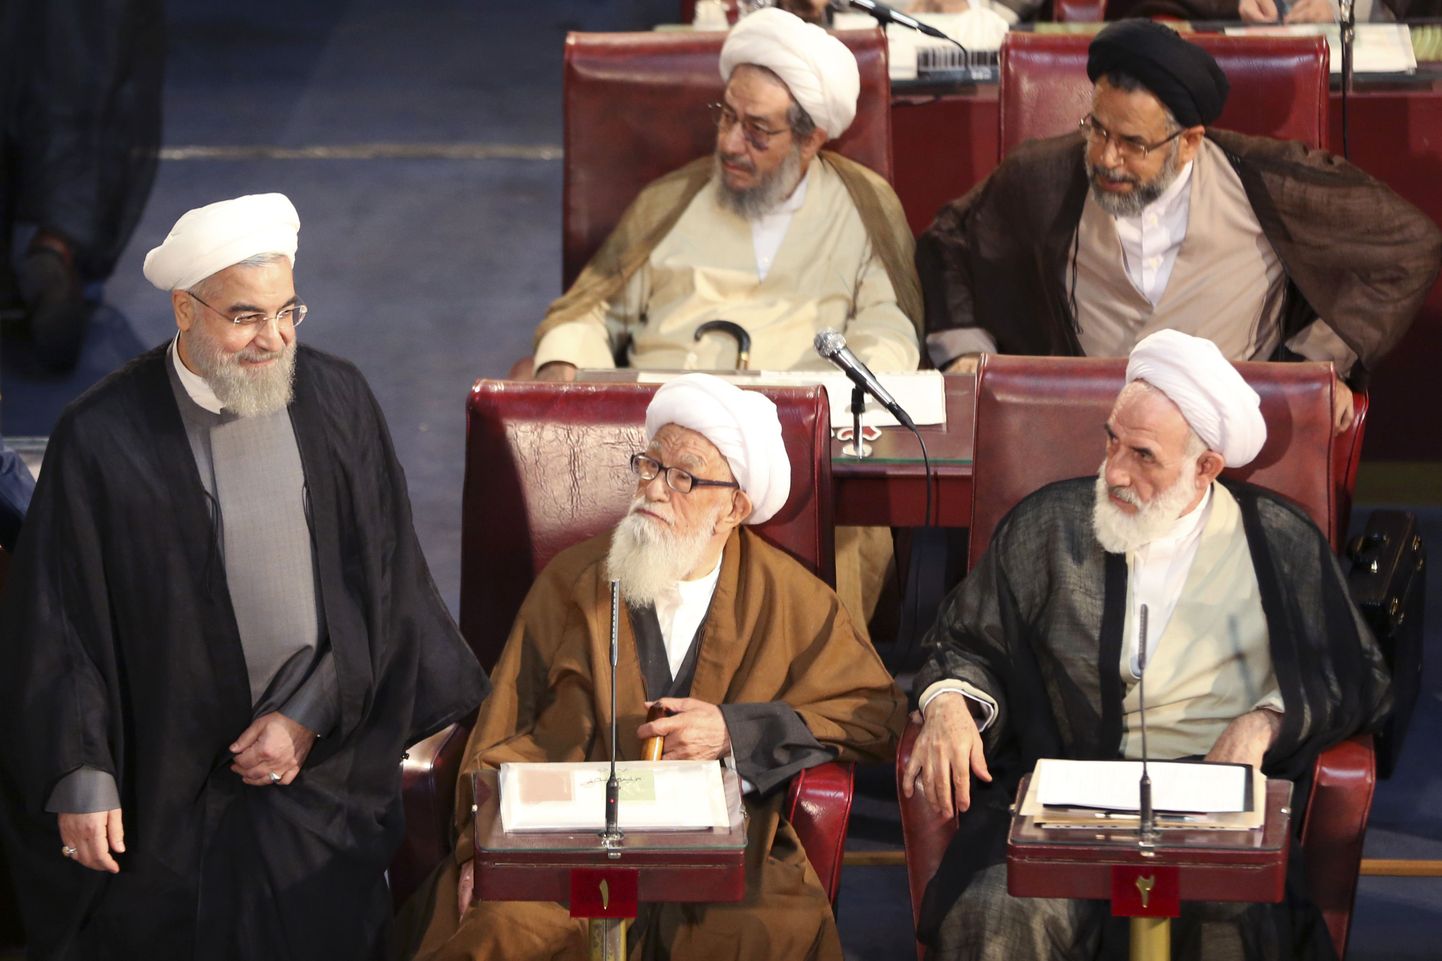 Iranian President Hassan Rouhani, left, who is also a member Experts Assembly, arrives at a biannual meeting of the assembly in Tehran, Iran, Tuesday, Sept. 1, 2015. The 86-member all-cleric assembly is charged with choosing or dismissing the nation's supreme leader, the highest-ranking official who has the final say on all state matters. (AP Photo/Vahid Salemi)